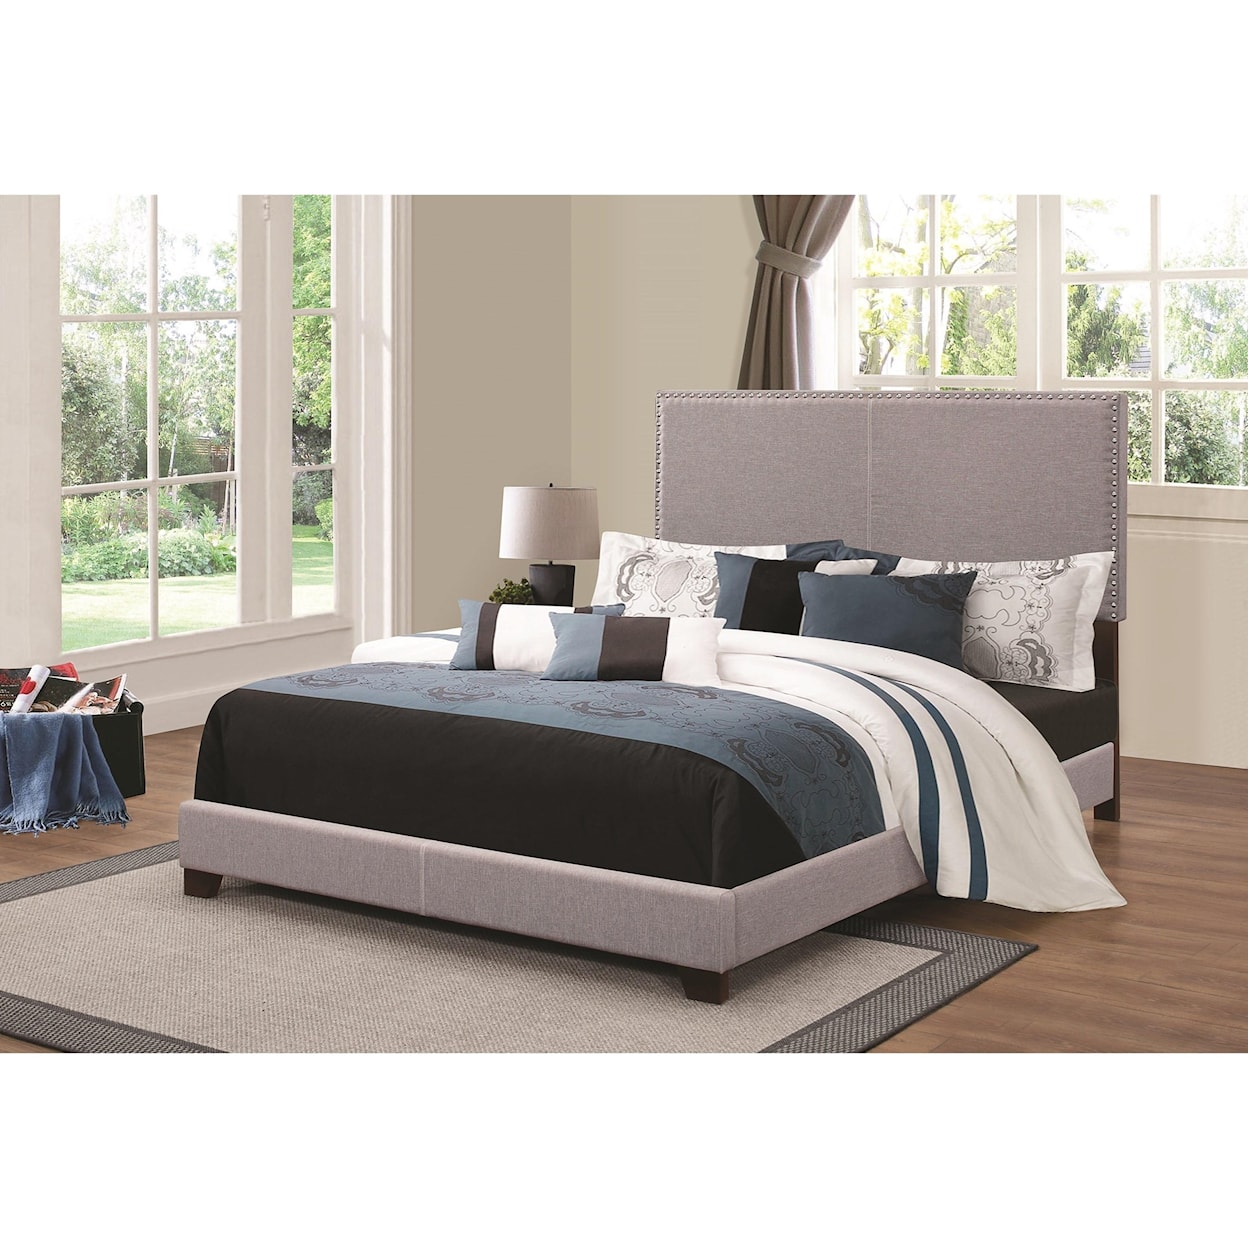 Michael Alan CSR Select Upholstered Beds Cal King Bed